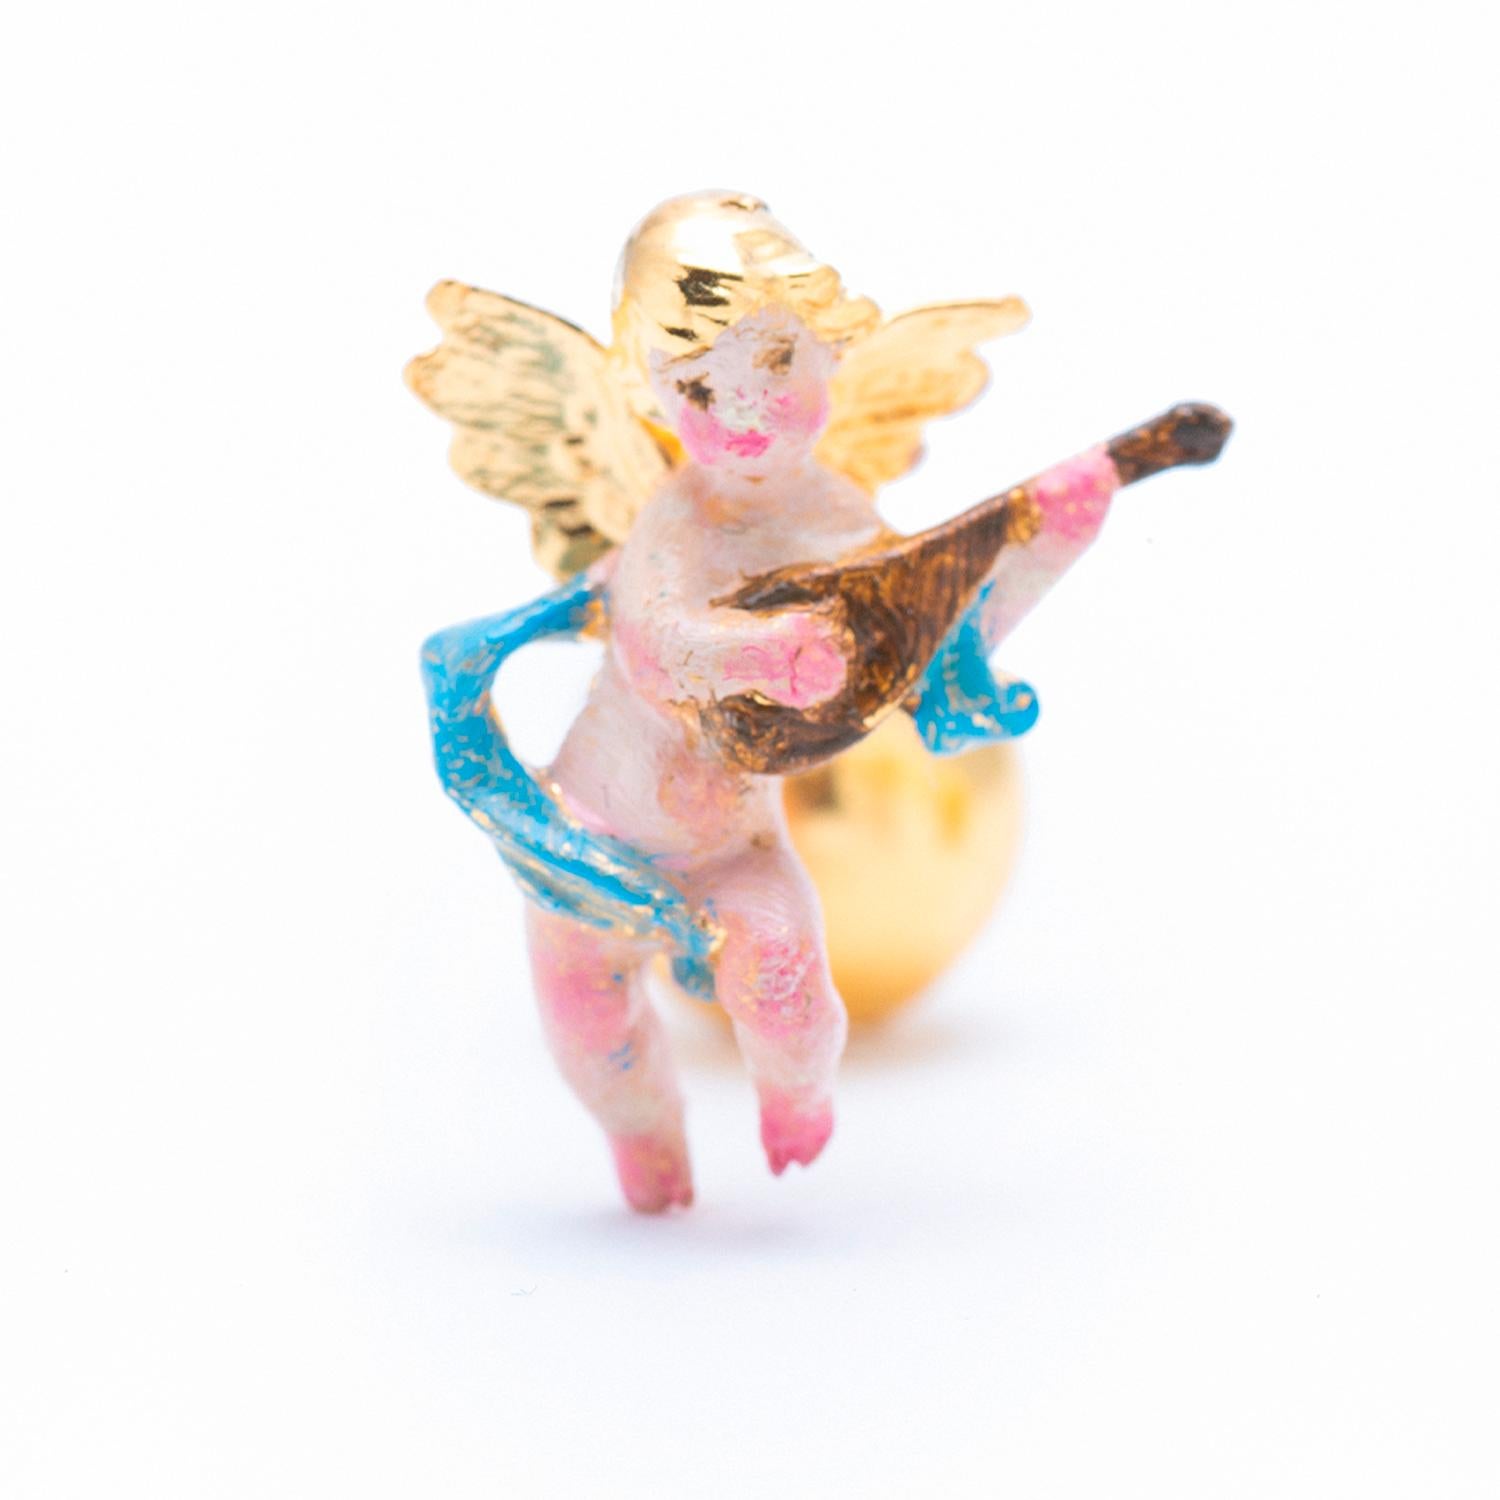 21st Century Polychromed Musician Angels Guitar Violin Yellow Gold Cufflinks

MADE TO ORDER

18 Karat Gold Cufflinks Polychromed Musician Angels

These cufflinks represent our admiration for the Valencian Baroque. It is a collaboration with the